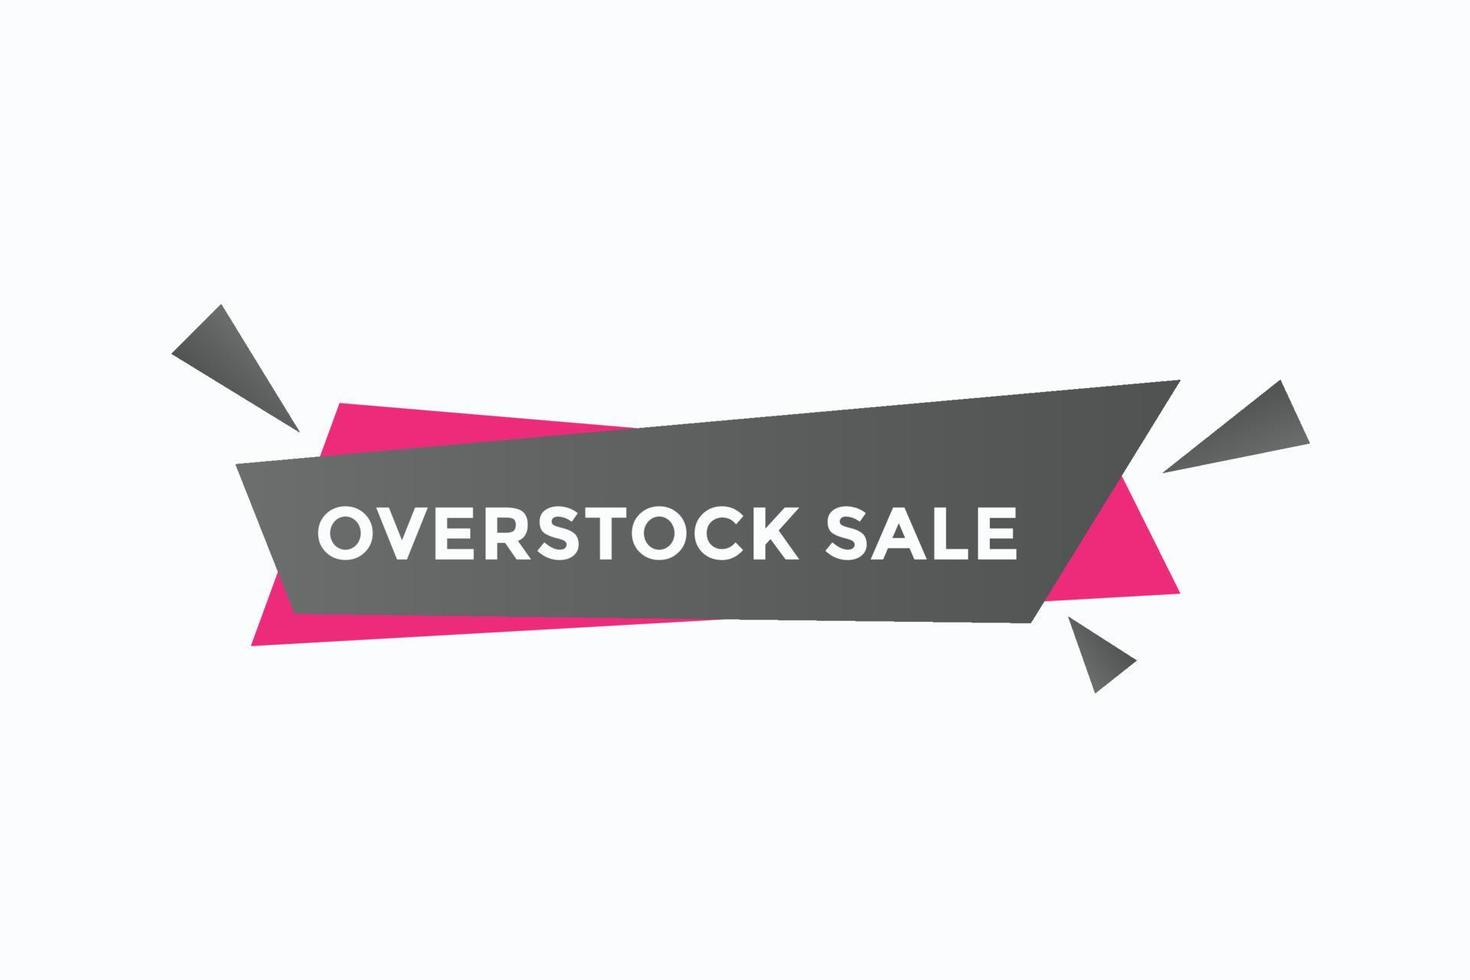 https://static.vecteezy.com/system/resources/previews/016/879/970/non_2x/overstock-sale-buttons-sign-label-speech-bubble-overstock-sale-free-vector.jpg